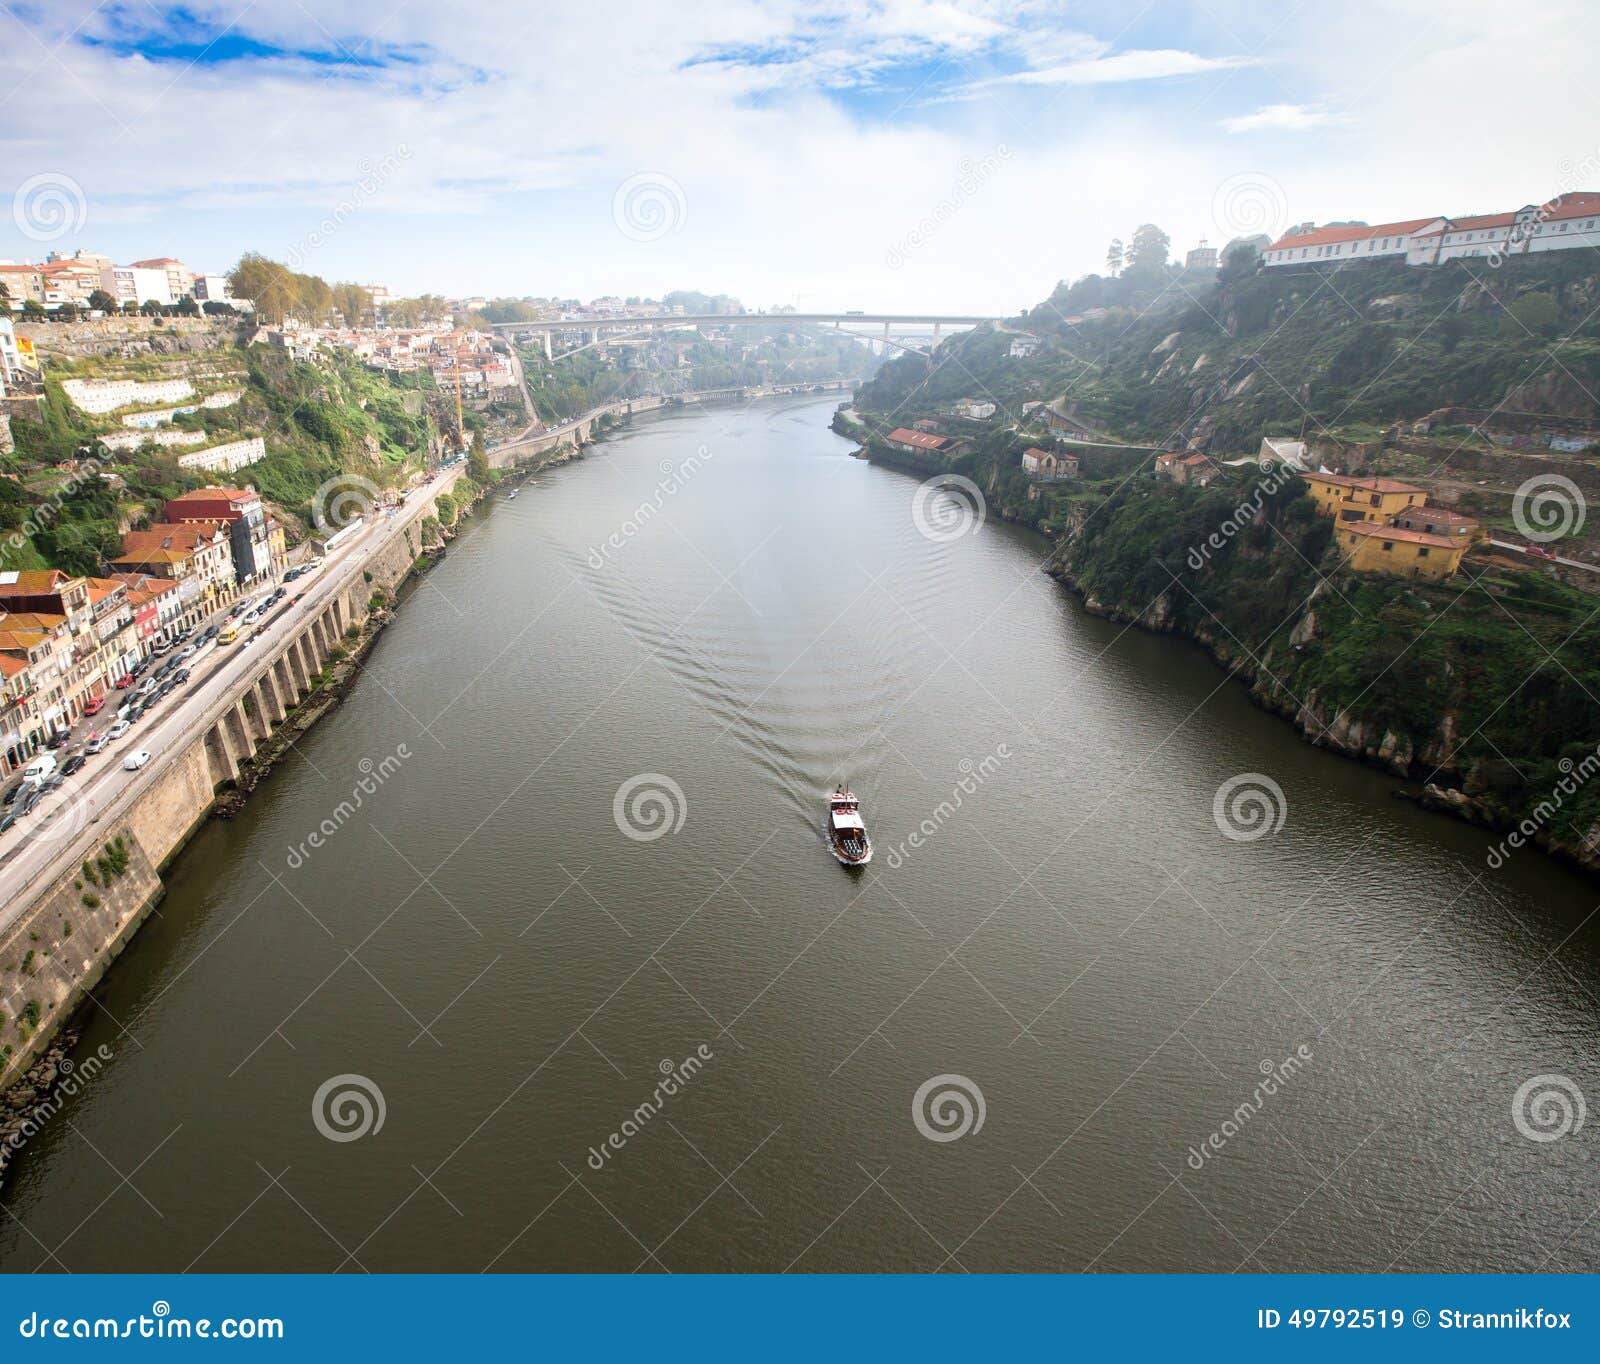 view of the river douro and waterfronts in the city of porto. sunny day